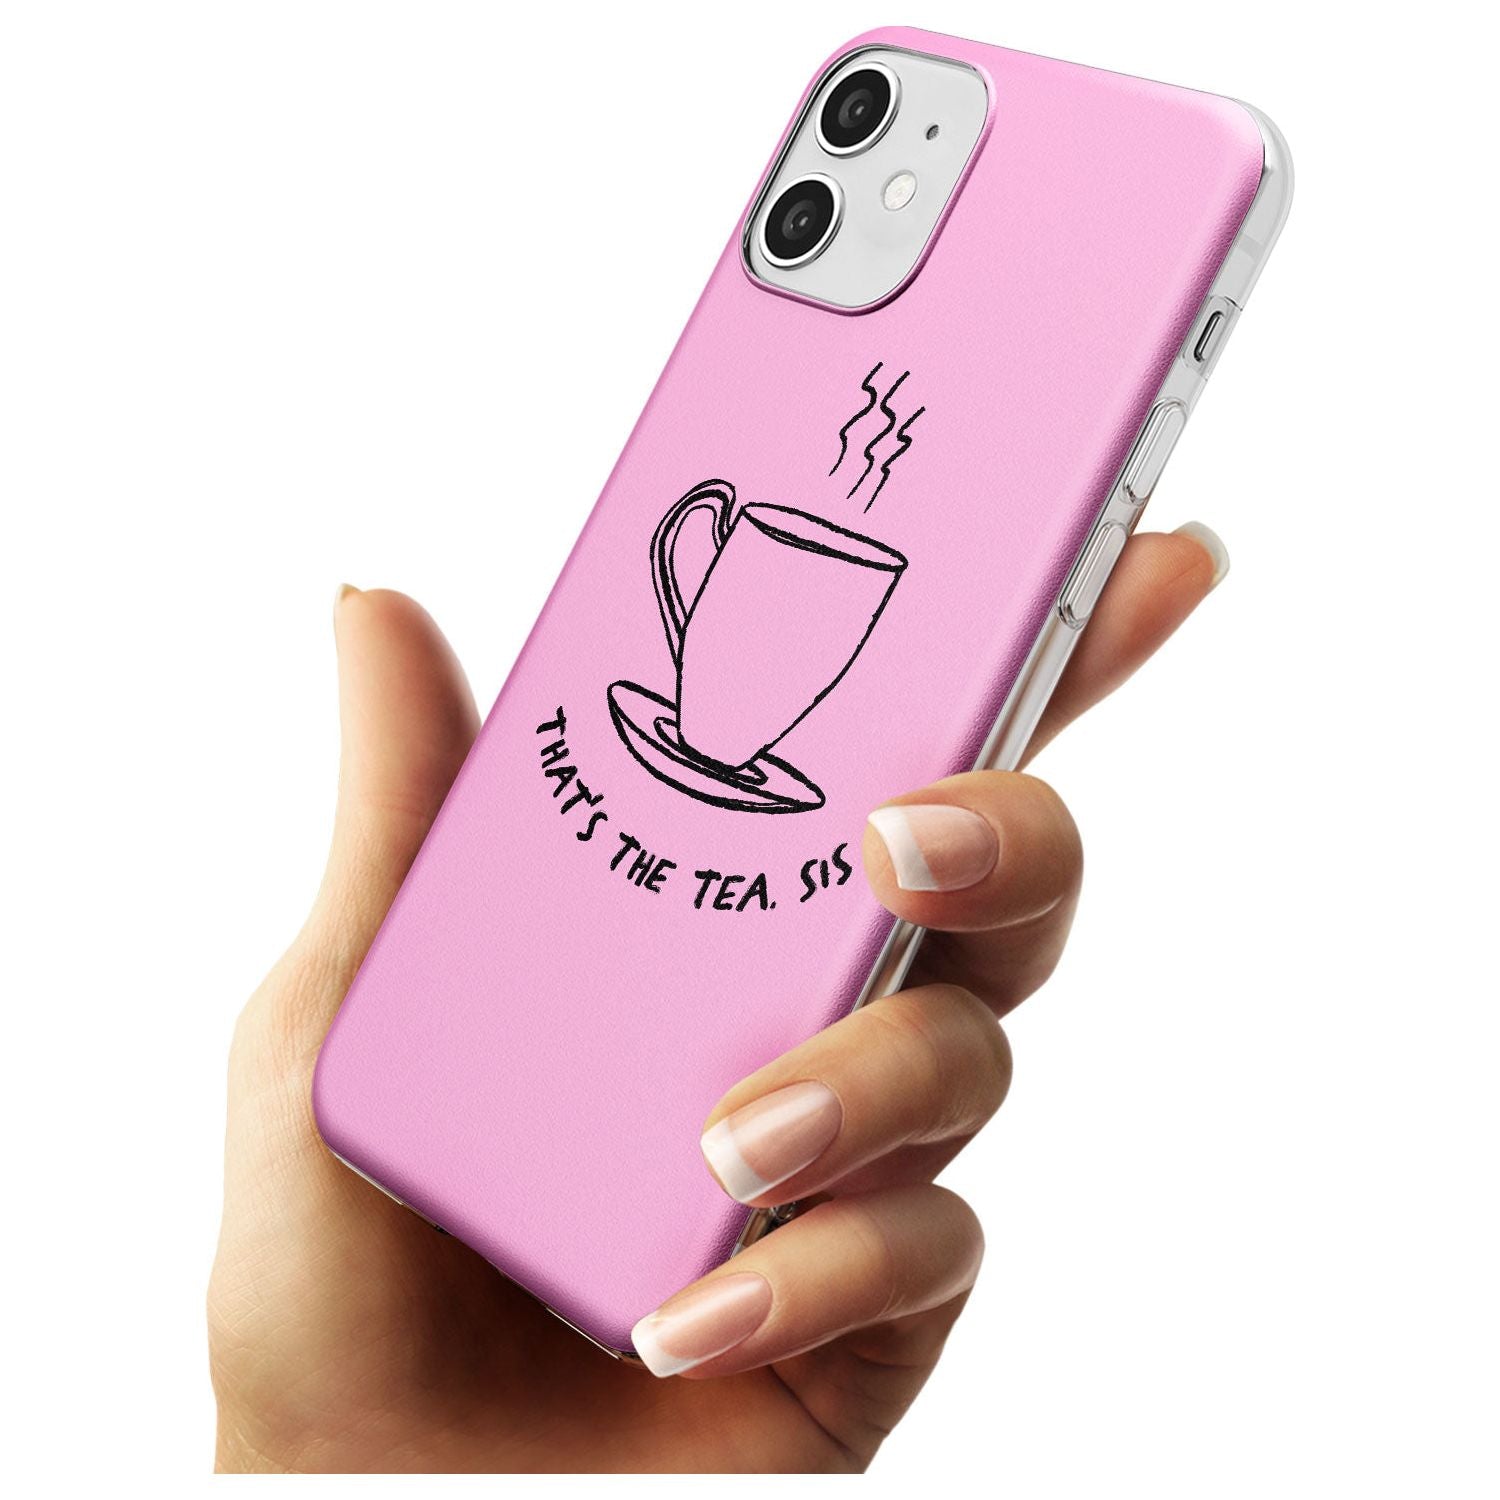 That's the Tea, Sis Pink Slim TPU Phone Case for iPhone 11